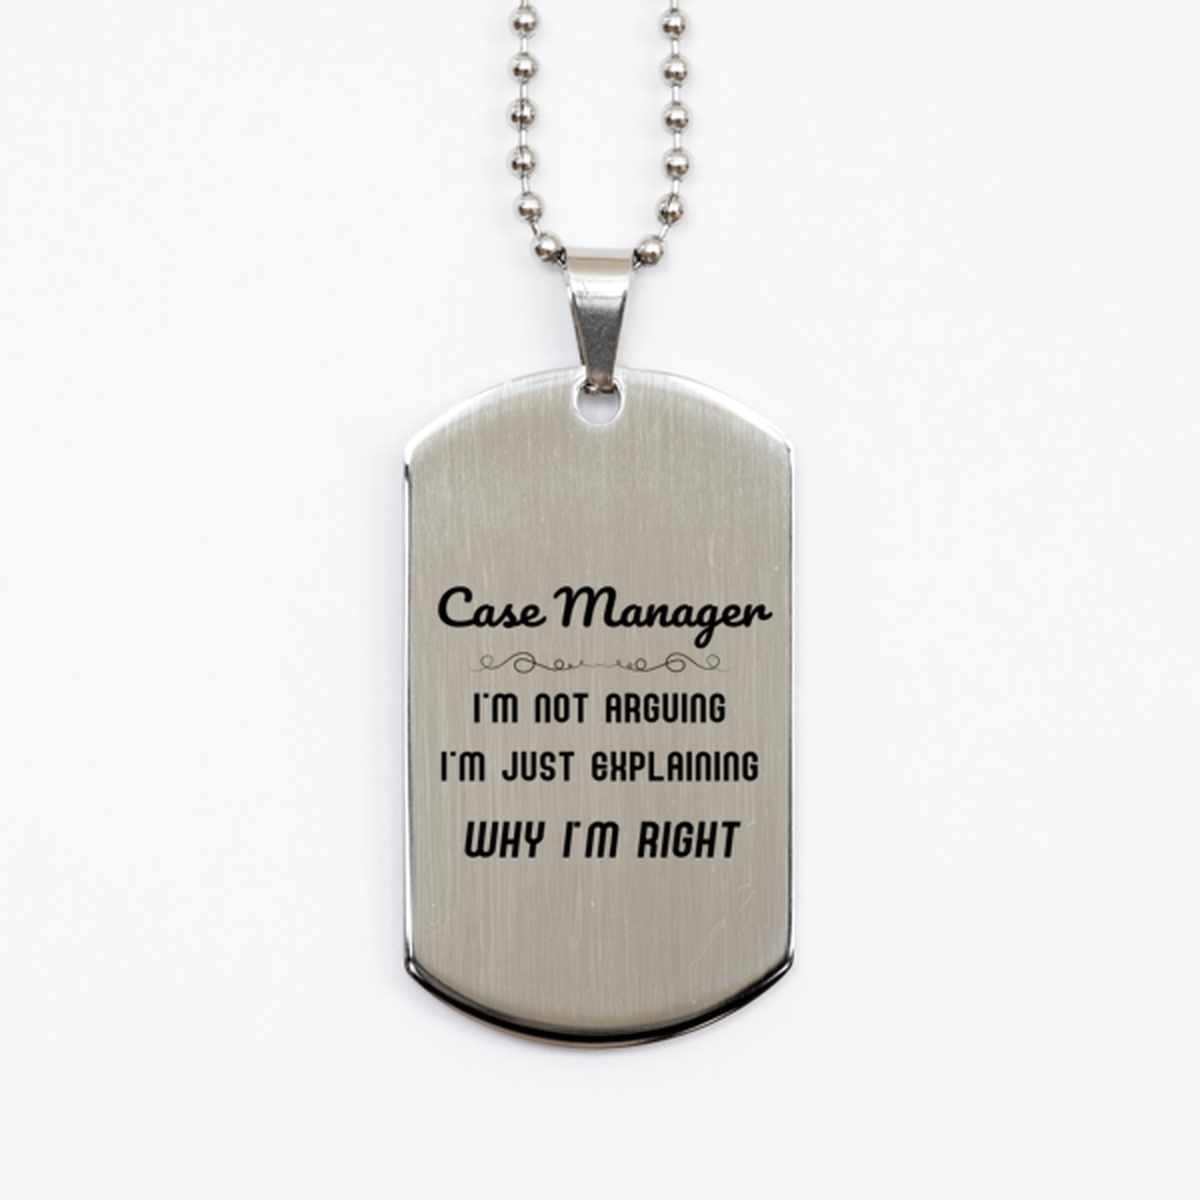 Case Manager I'm not Arguing. I'm Just Explaining Why I'm RIGHT Silver Dog Tag, Funny Saying Quote Case Manager Gifts For Case Manager Graduation Birthday Christmas Gifts for Men Women Coworker